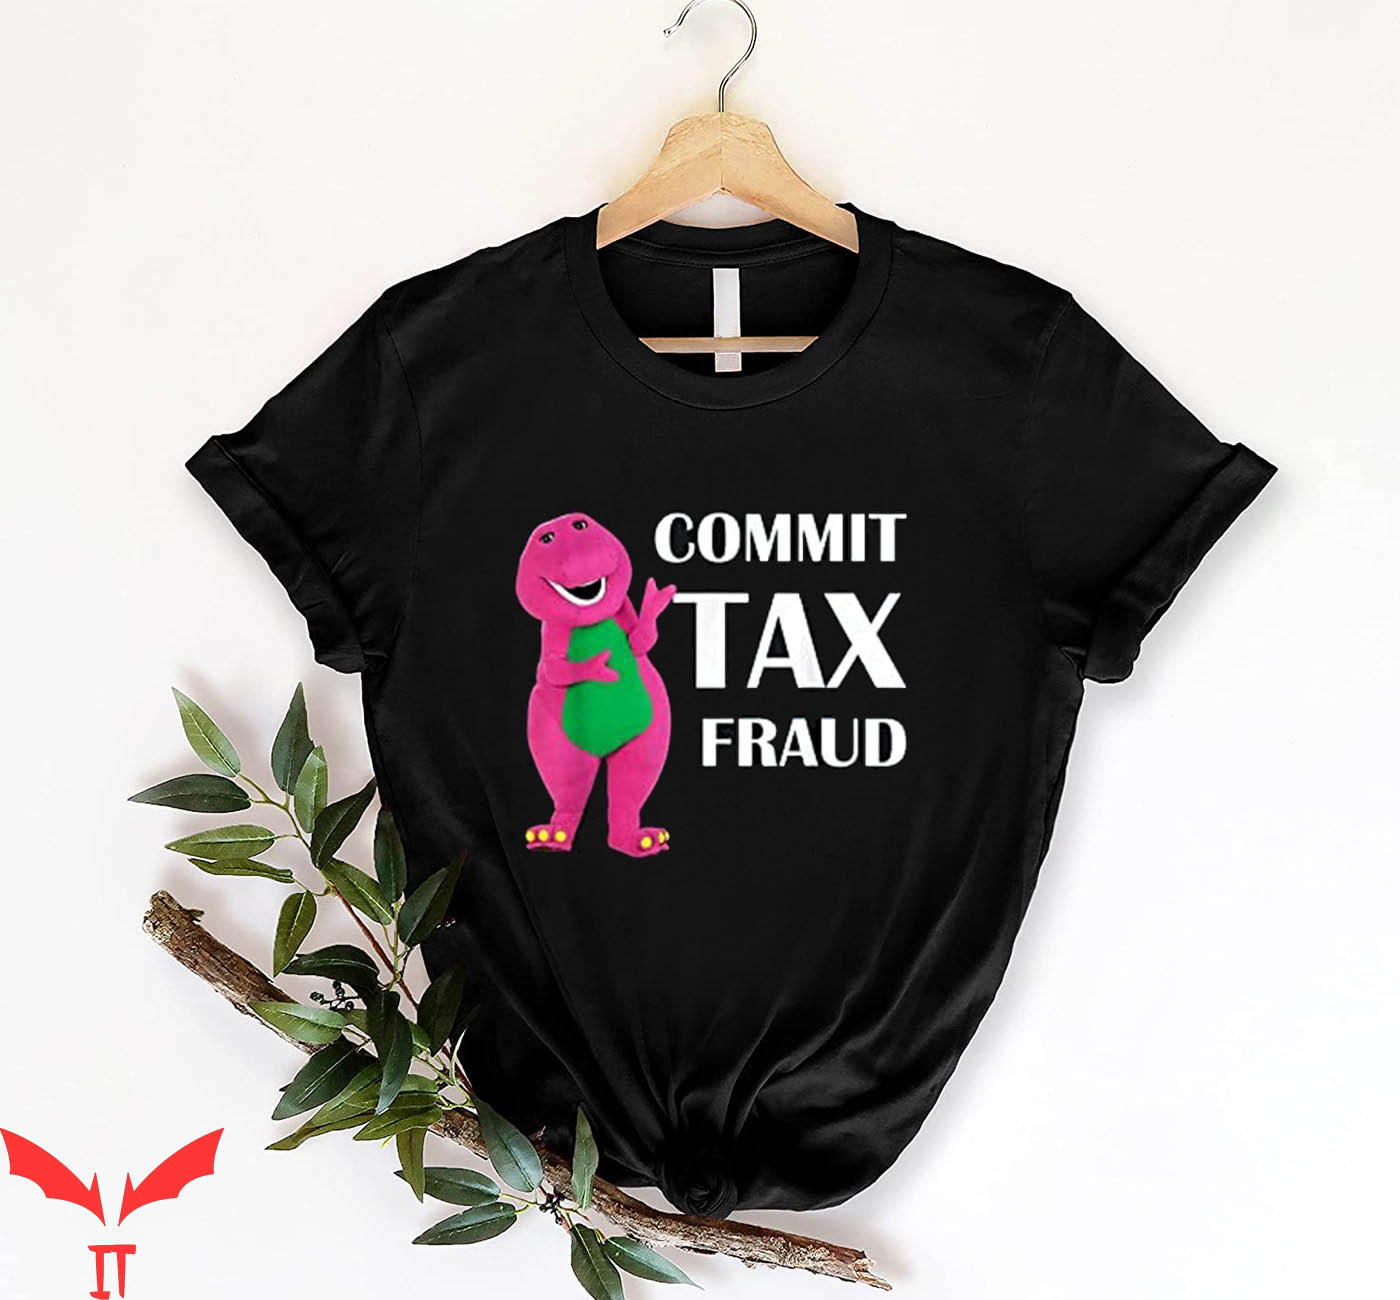 Commit Tax Fraud T-Shirt Vintage Graphic Trendy Style Tee